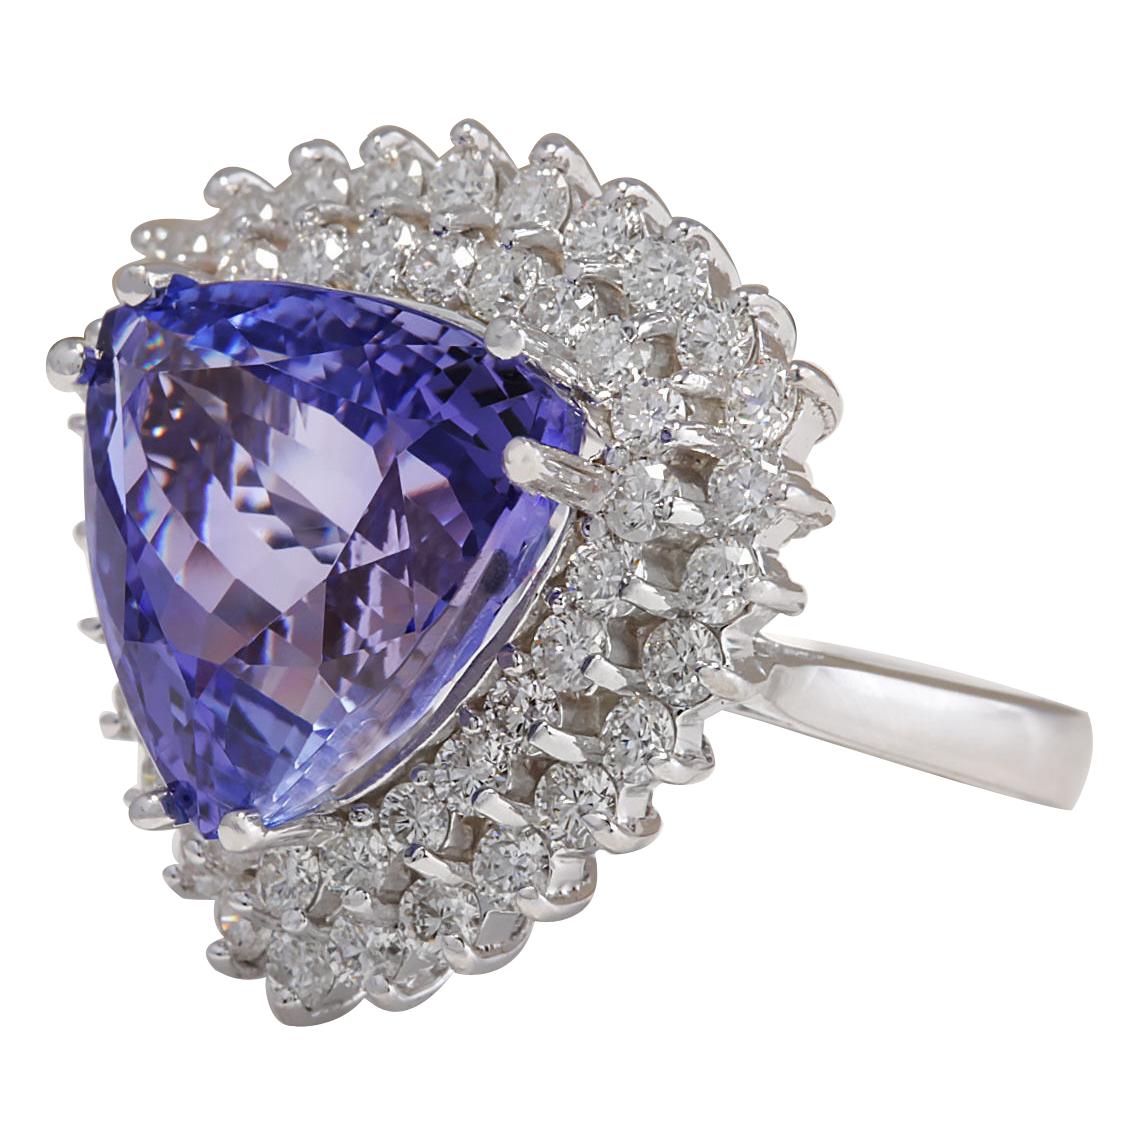 Stamped: 14K White Gold
Total Ring Weight: 10.5 Grams
Total Natural Tanzanite Weight is 11.82 Carat (Measures: 14.00x14.00 mm)
Color: Blue
Total Natural Diamond Weight is 1.80 Carat
Color: F-G, Clarity: VS2-SI1
Face Measures: 22.90x22.90 mm
Sku: